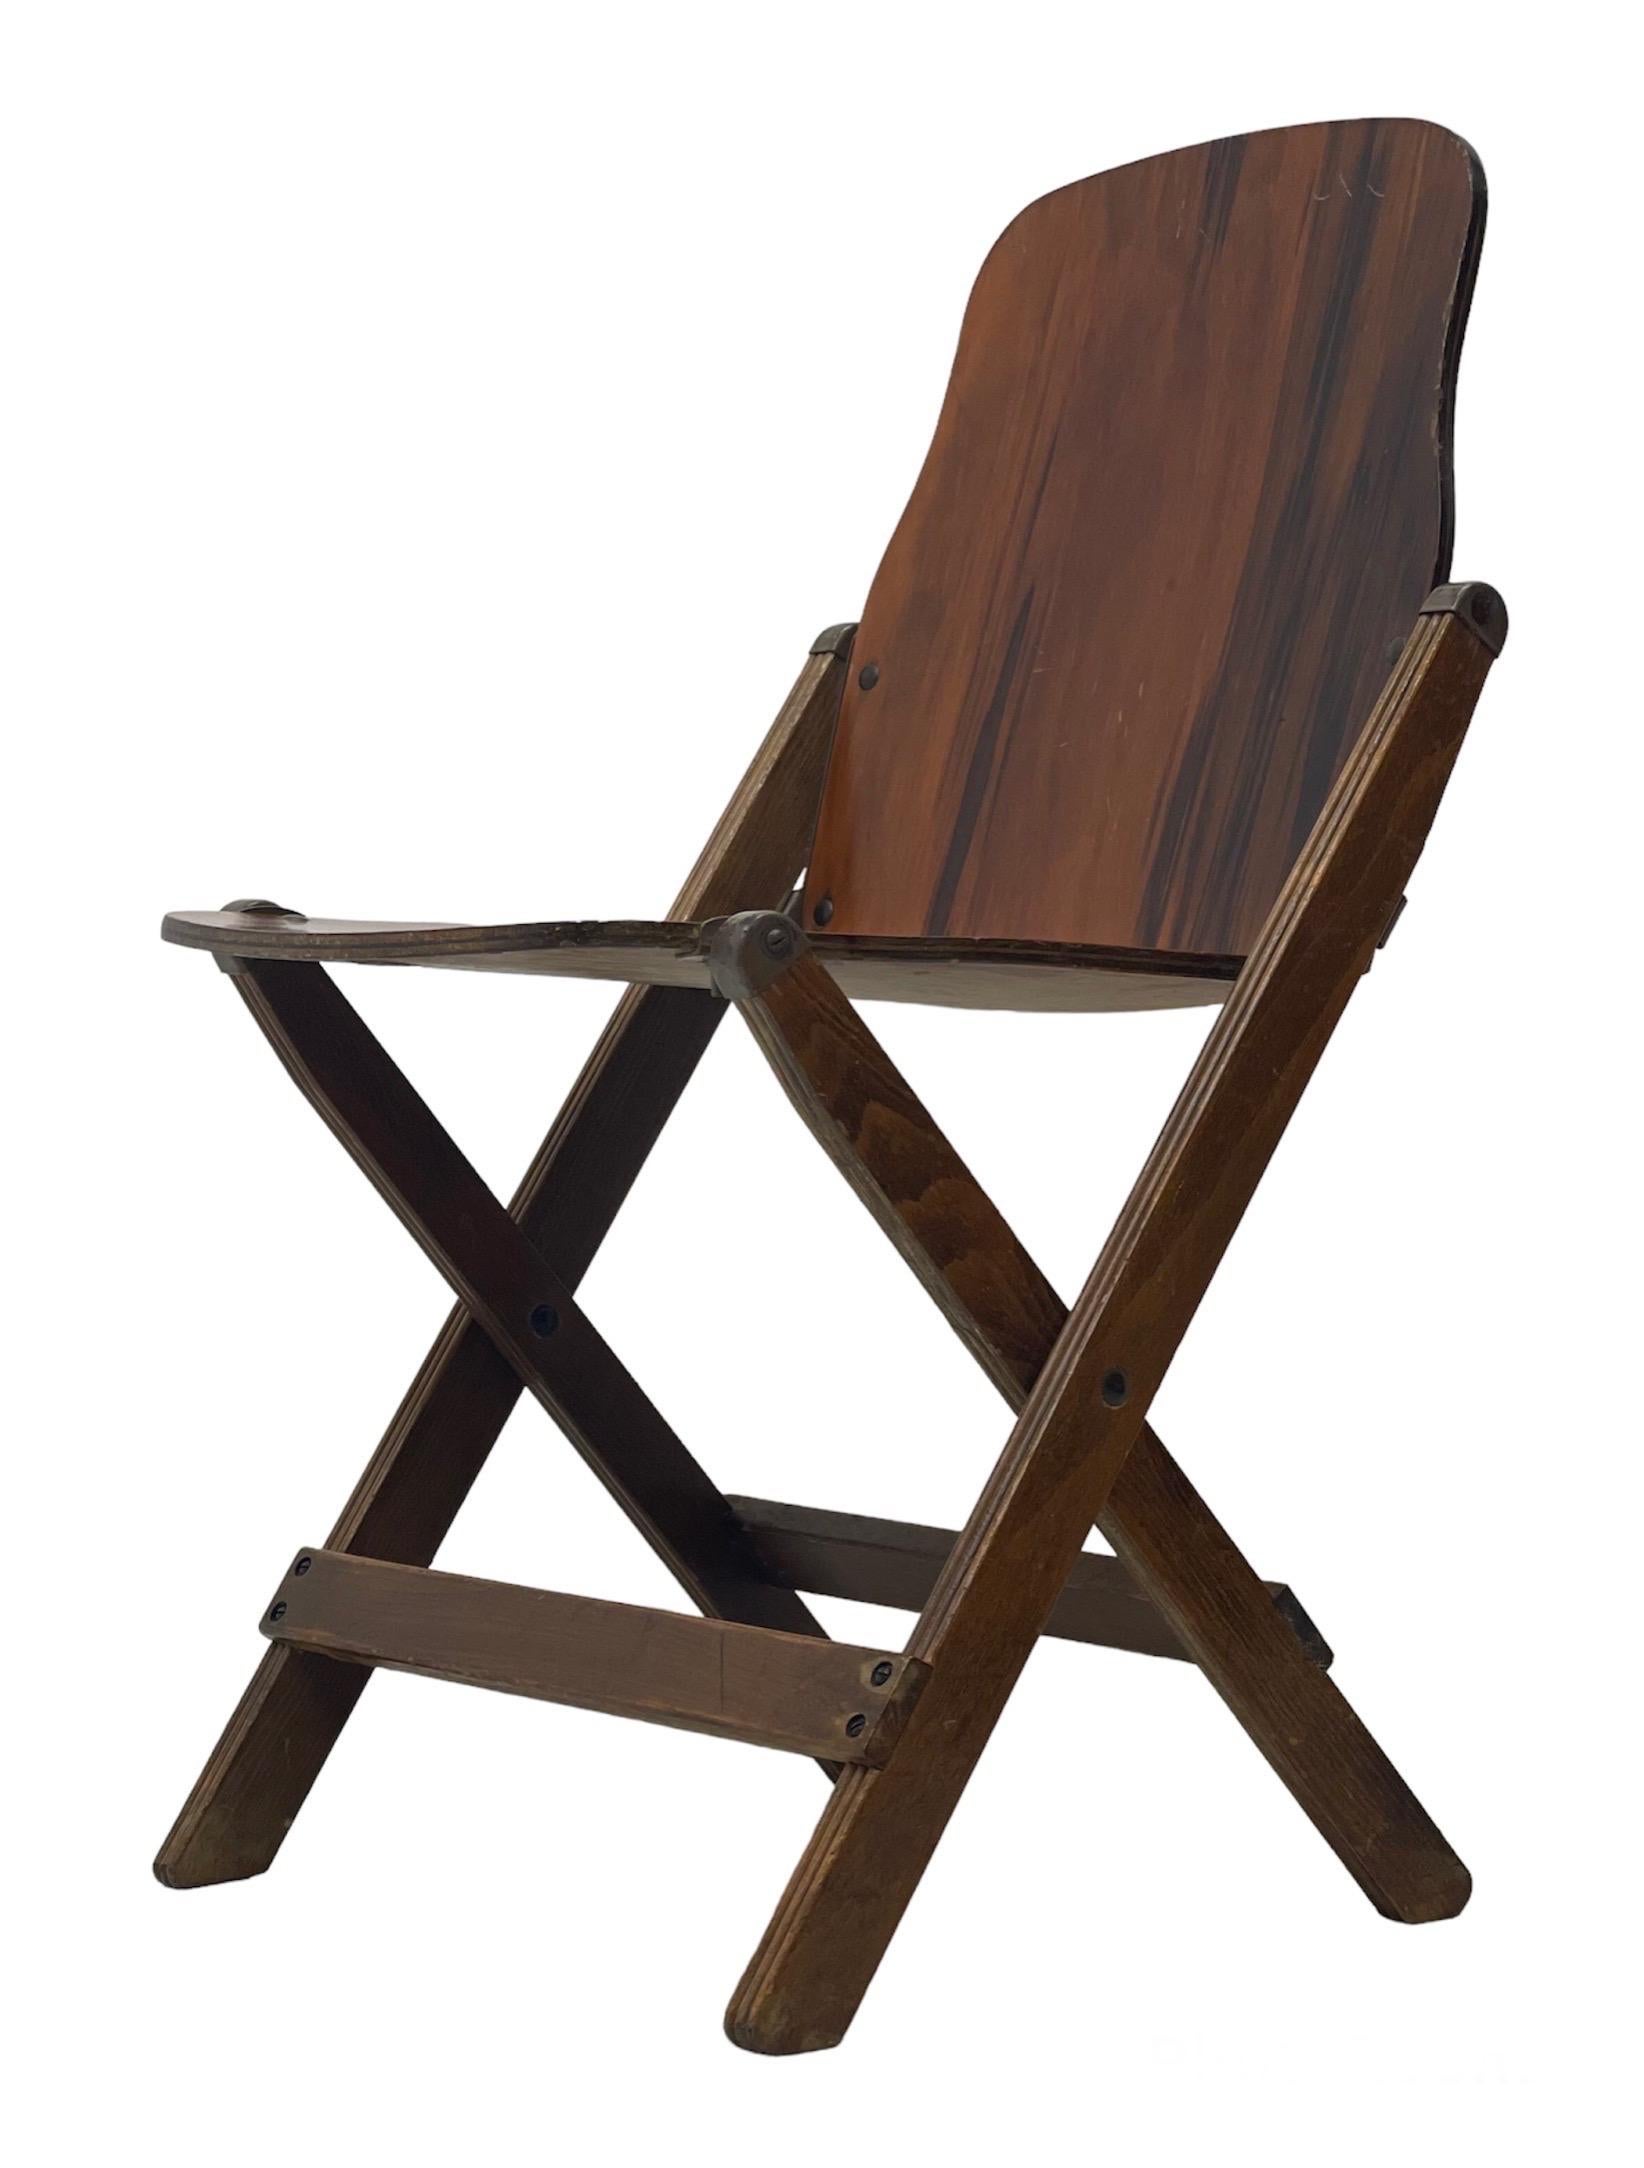 Vintage wooden folding chair

Dimensions. 20 W ; 17 D ; 30 H

Seat Height. 17.